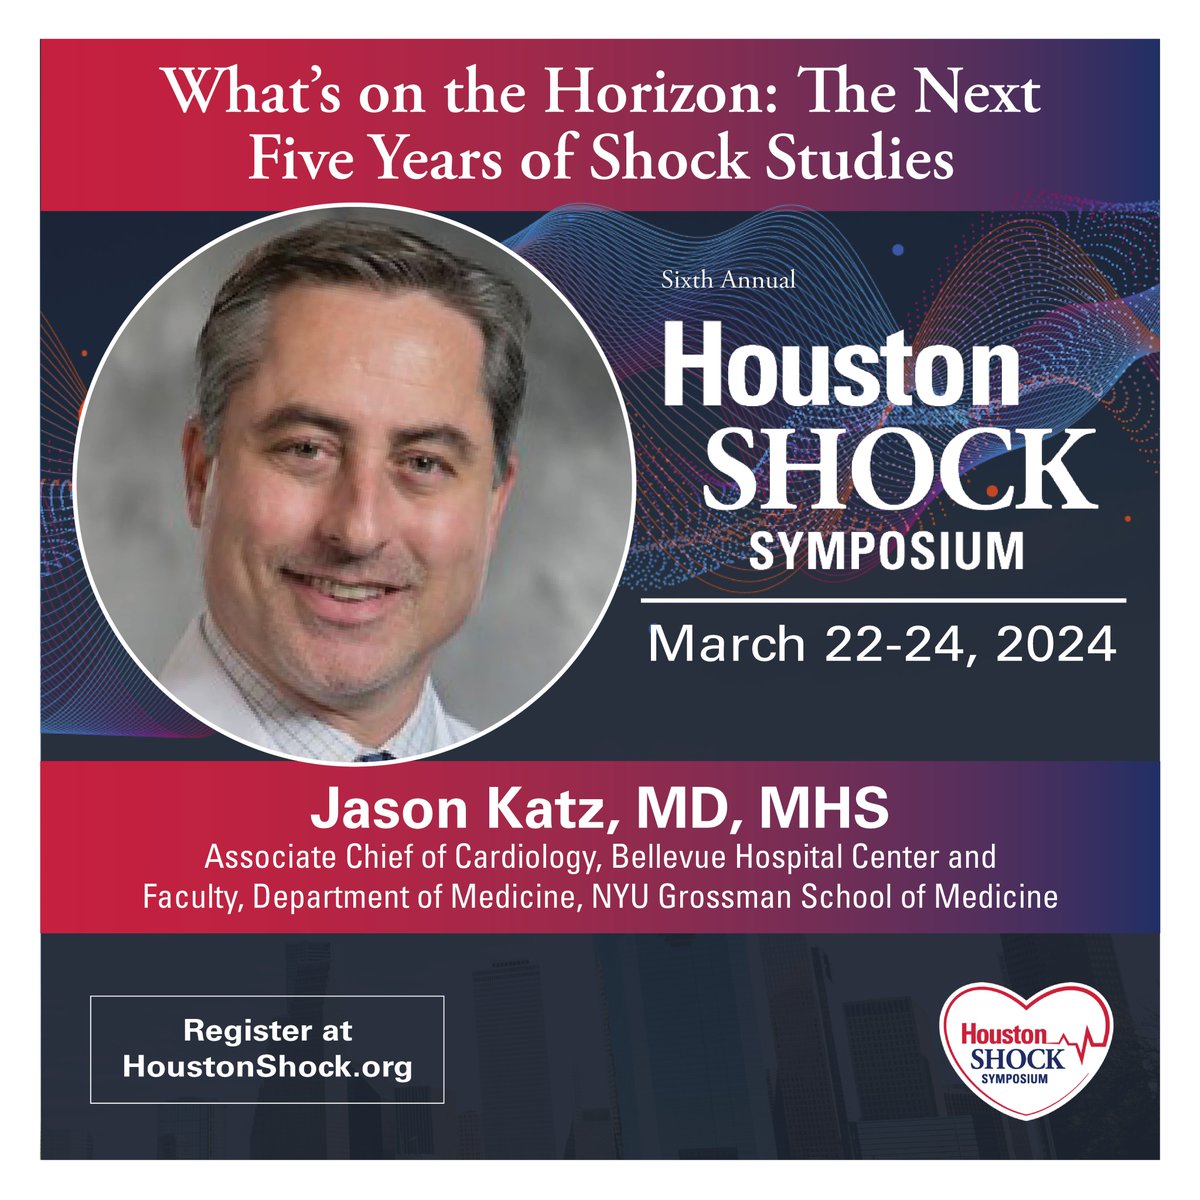 #HSS24 Curious about the future of shock? Dive into an intriguing @HoustonShockHSS session led by @JasonKatzMD for insights and discoveries. Register for free at houstonshock.org See you in March! #Cardiotwitter #ACCFIT